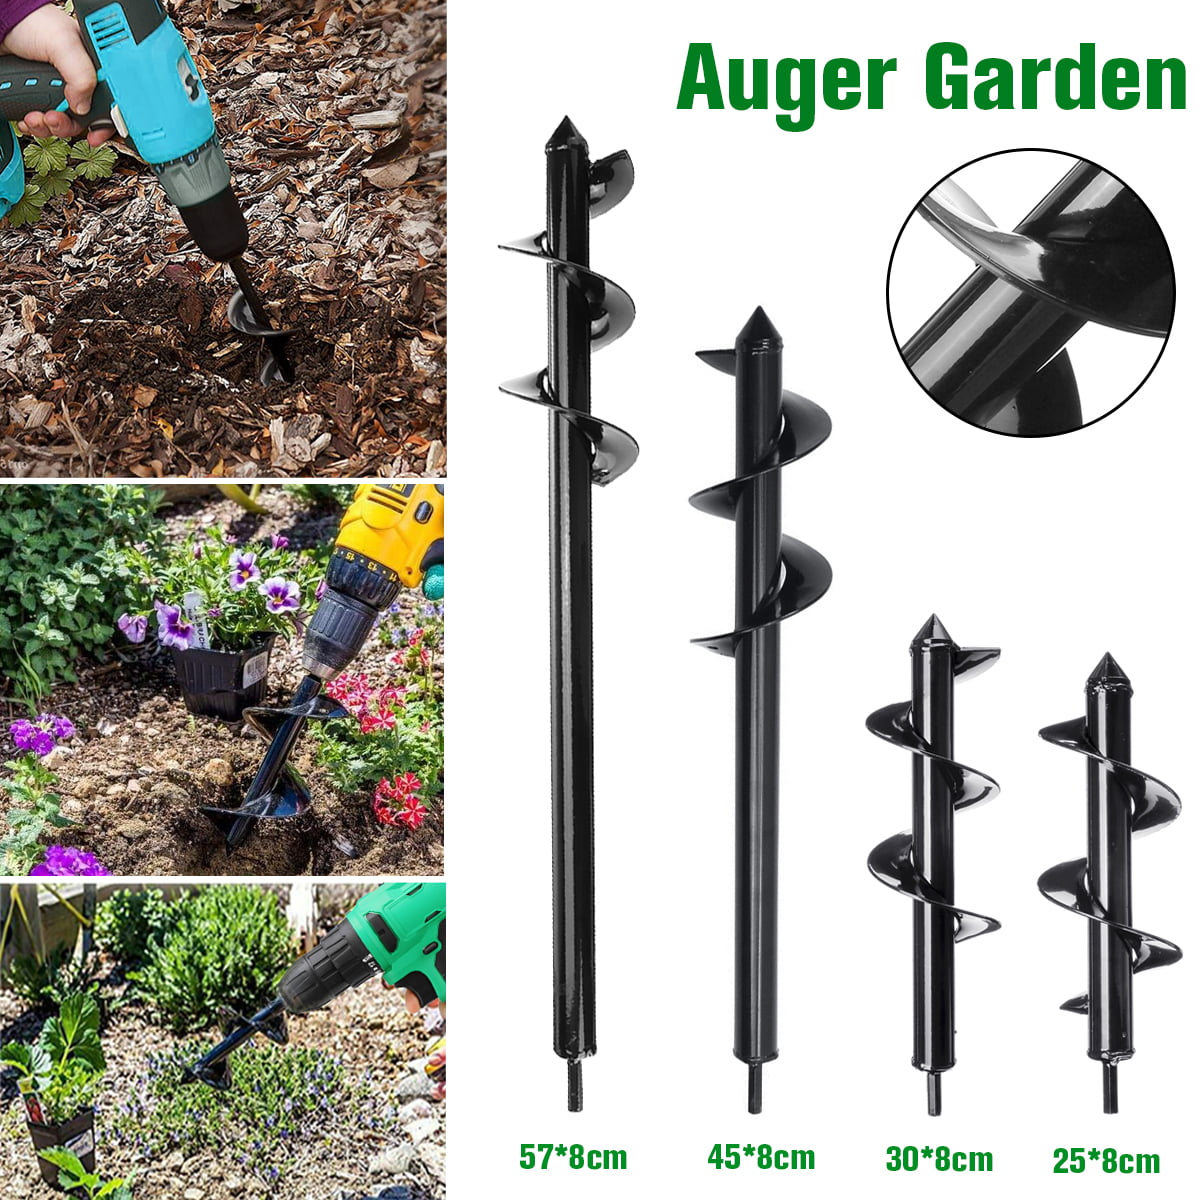 Auger 9 to 18 Inch Auger KitEarth Planter Spiral Auger Drill Bit Post Hole Digger Power Garden Drill Size : 7#